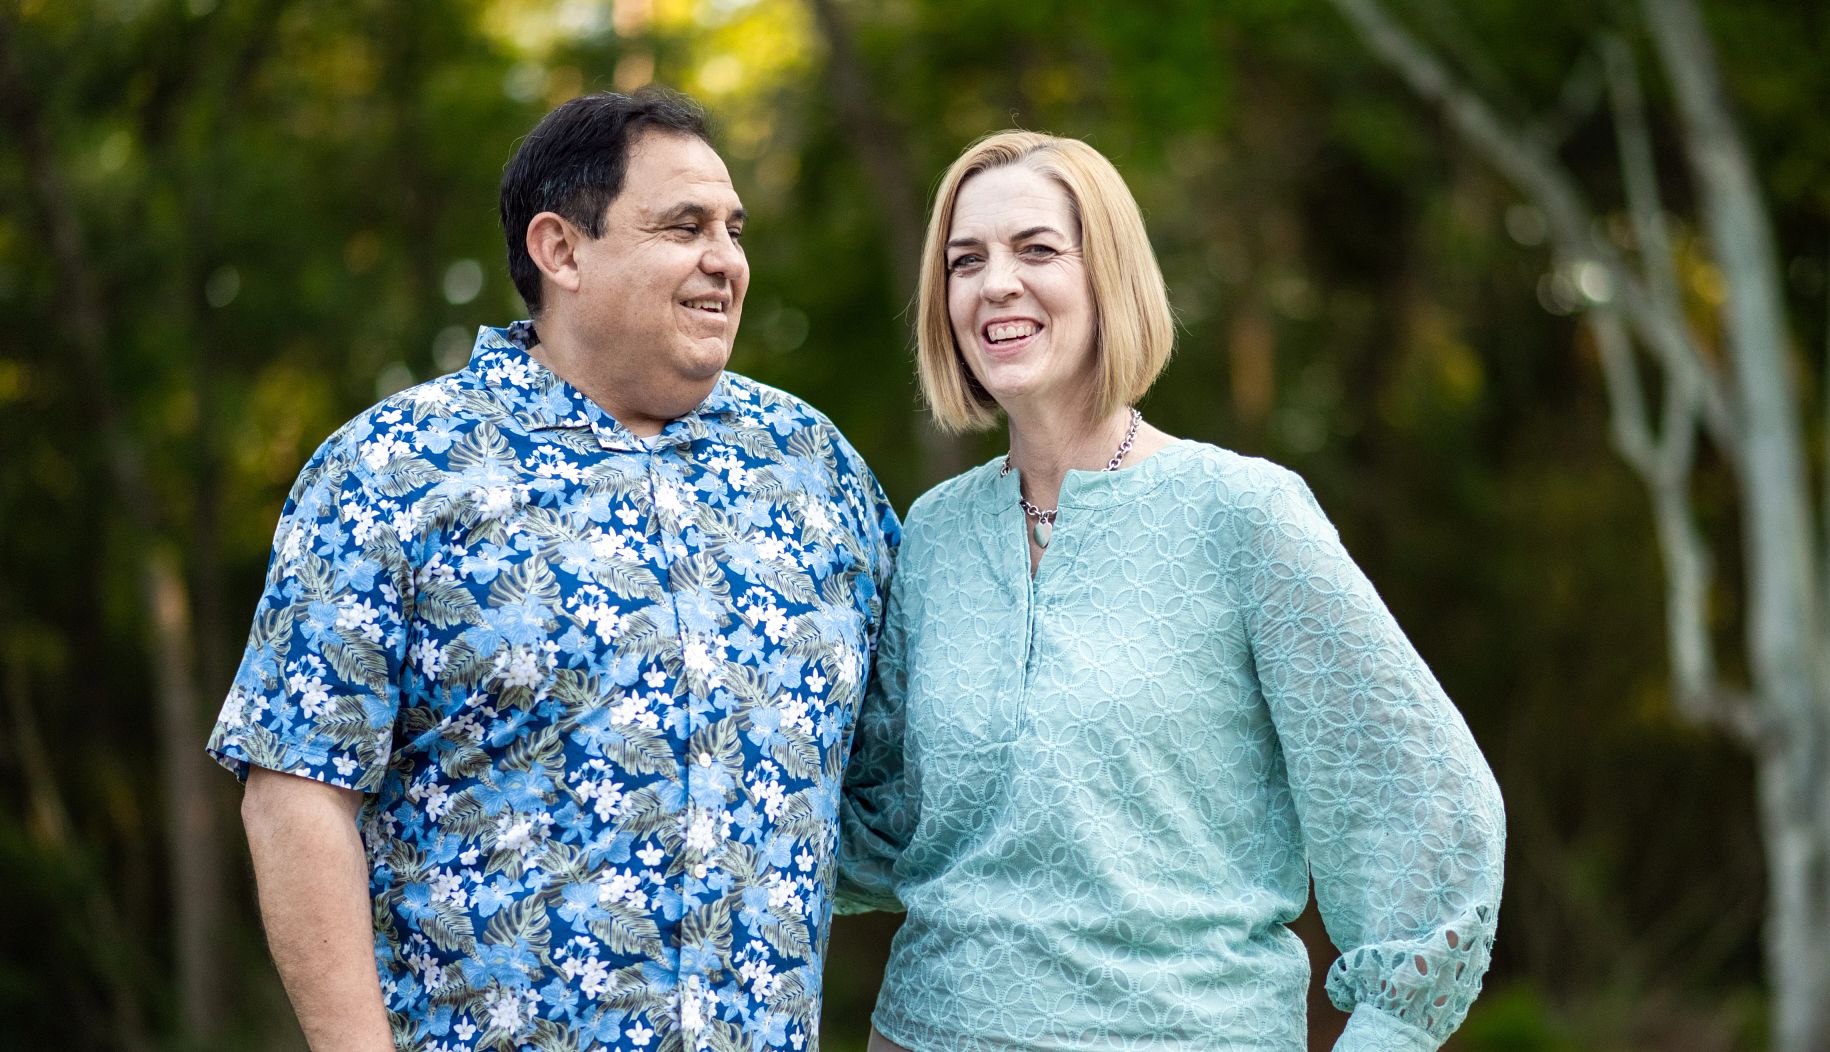 jaime and donna tovalin, both wearing printed shirts, smile for a portrait outside.